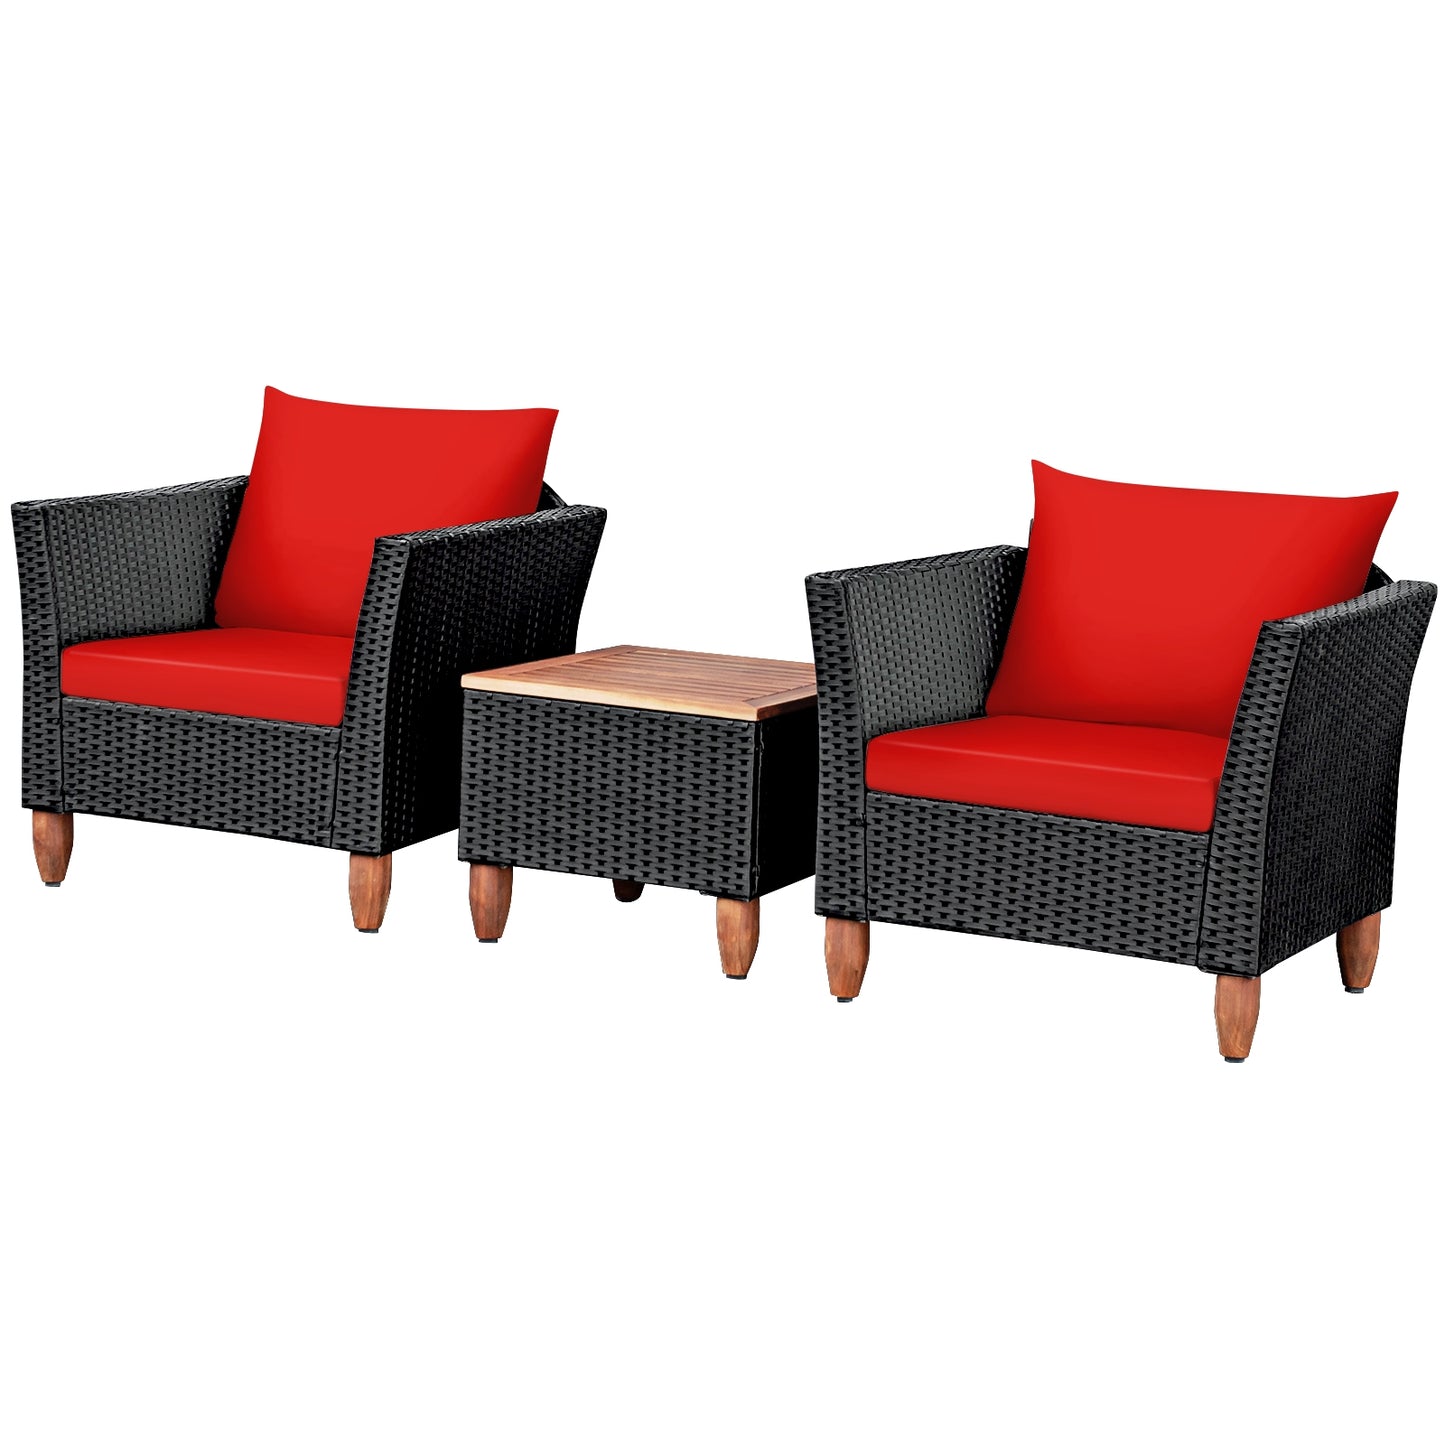 3 Pieces Outdoor Patio Rattan Furniture Set-Red